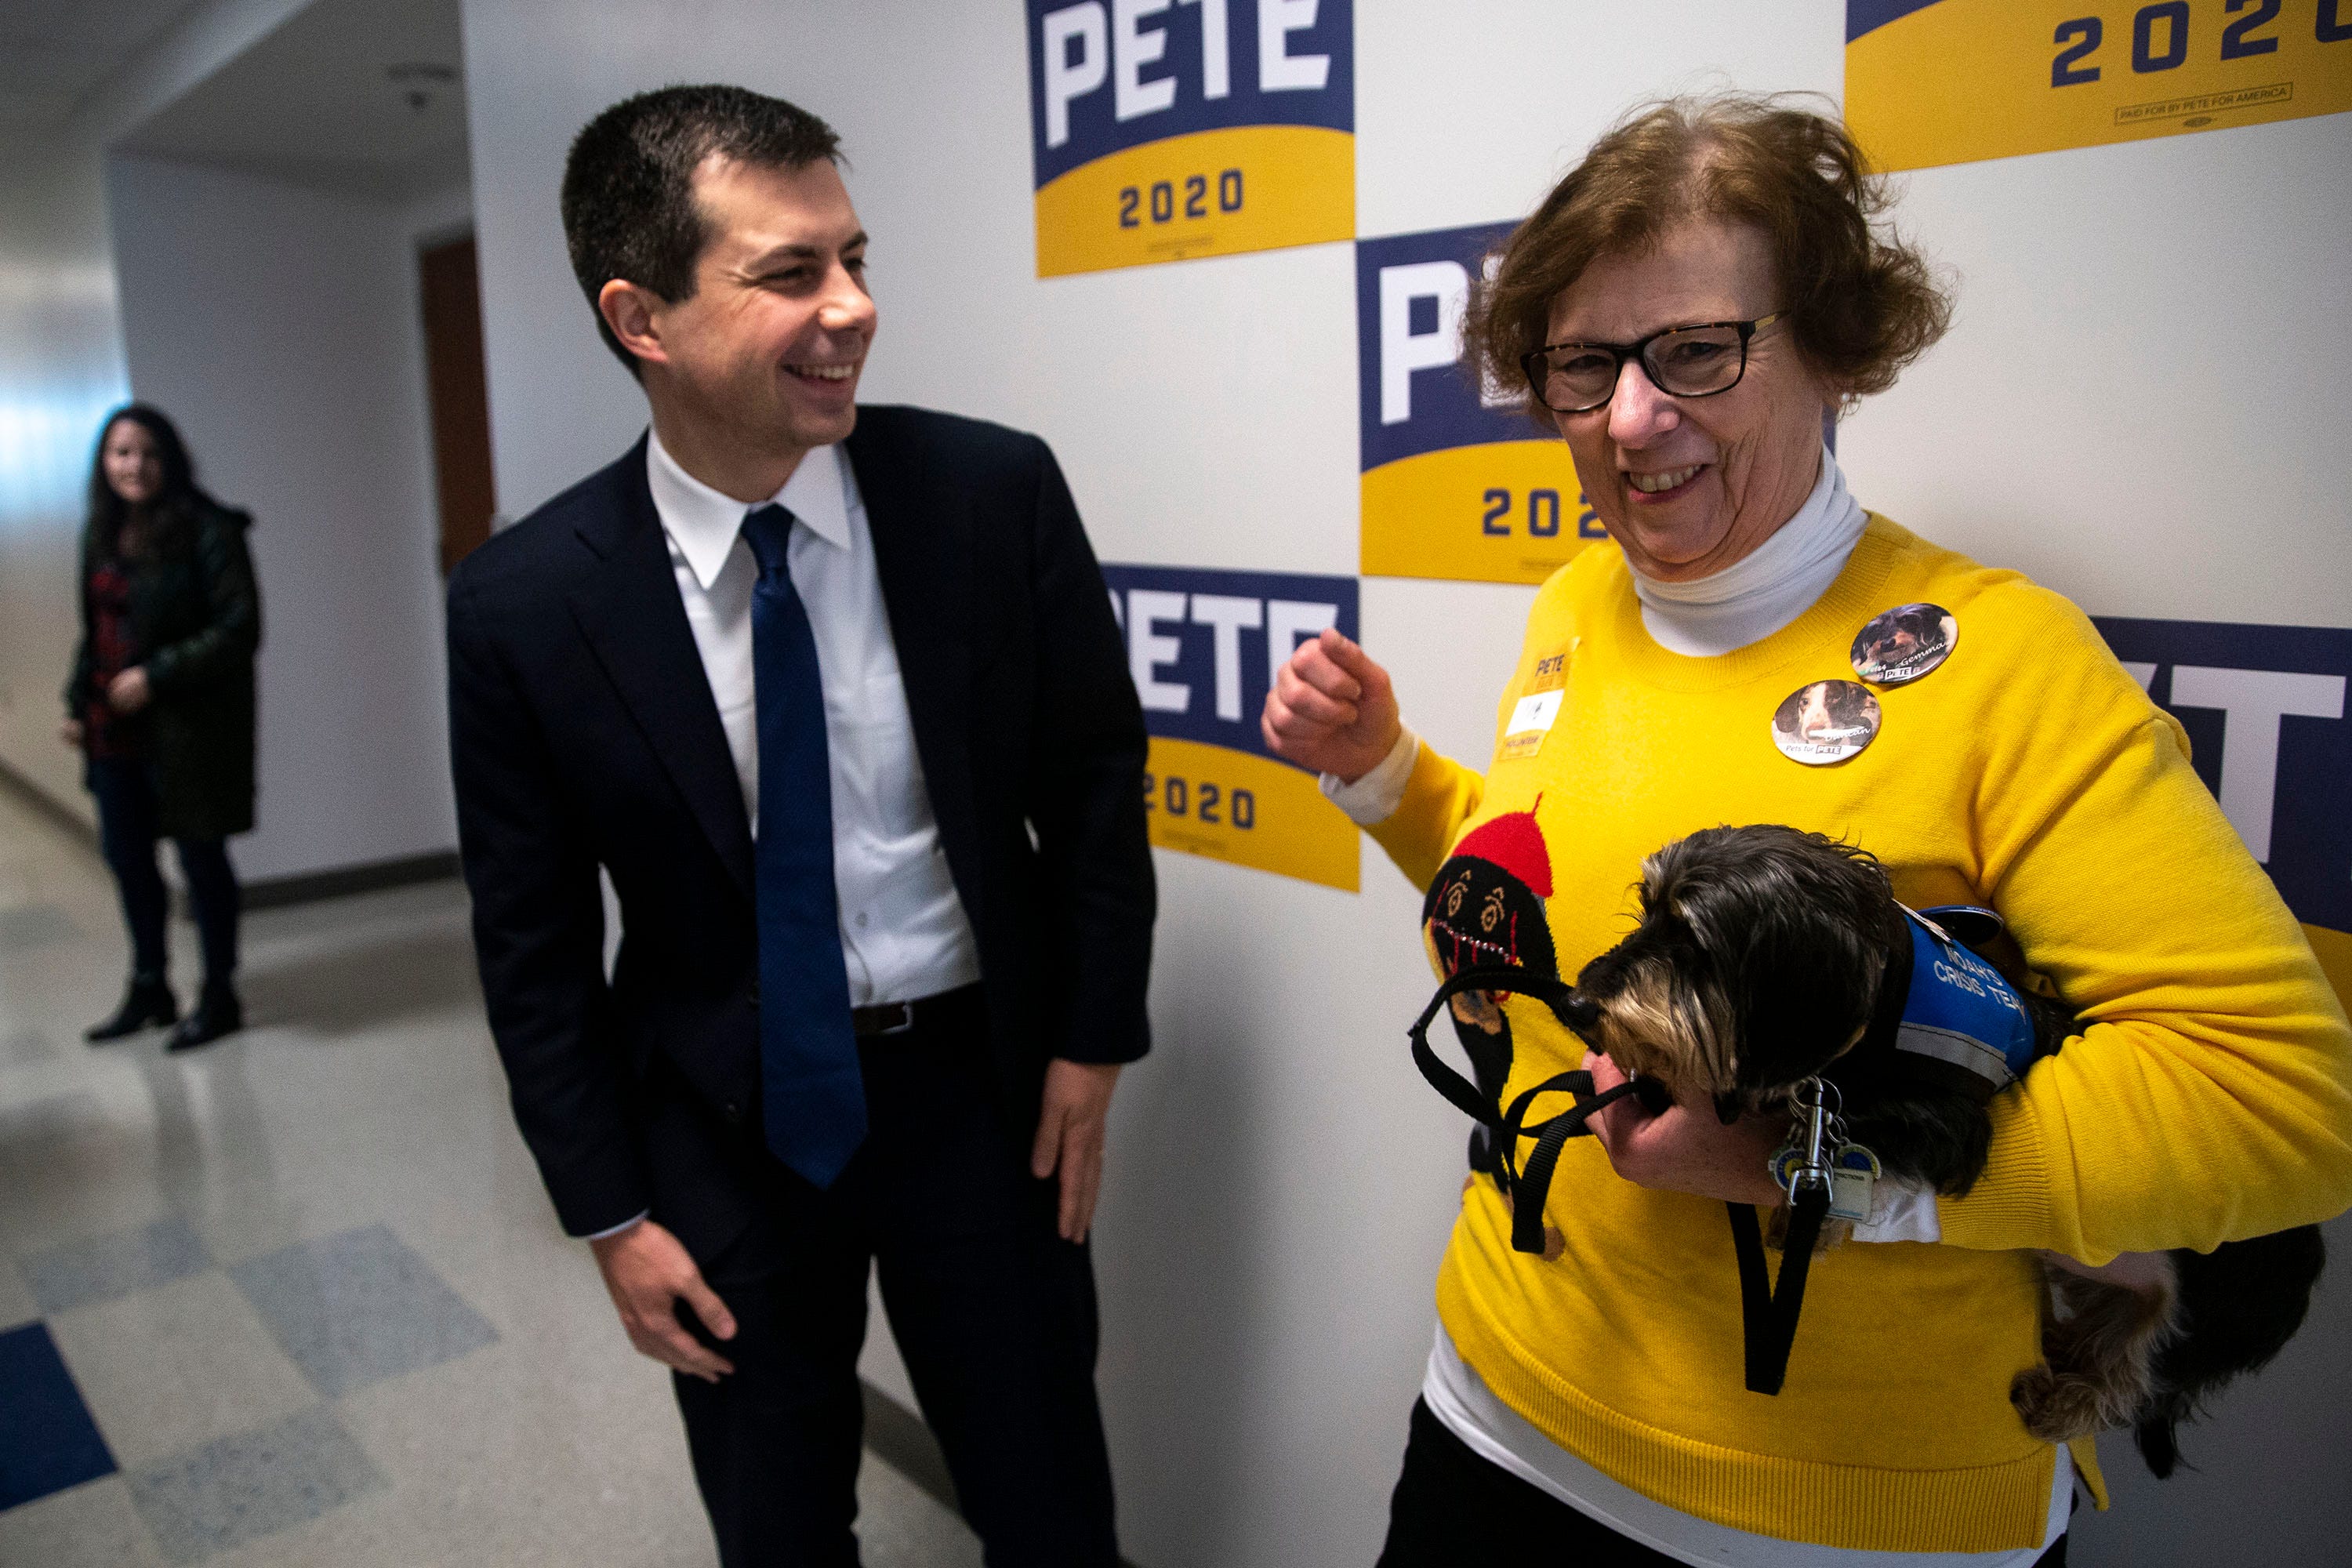 2:46PM - Pete Buttigieg, former Mayor of South Bend, Ind., meets campaign volunteer Vikki O'Hara, of Council Bluffs, and her two-year-old Dachshund Gemma before holding a town hall on Saturday, Jan. 18, 2020, in Harlan.